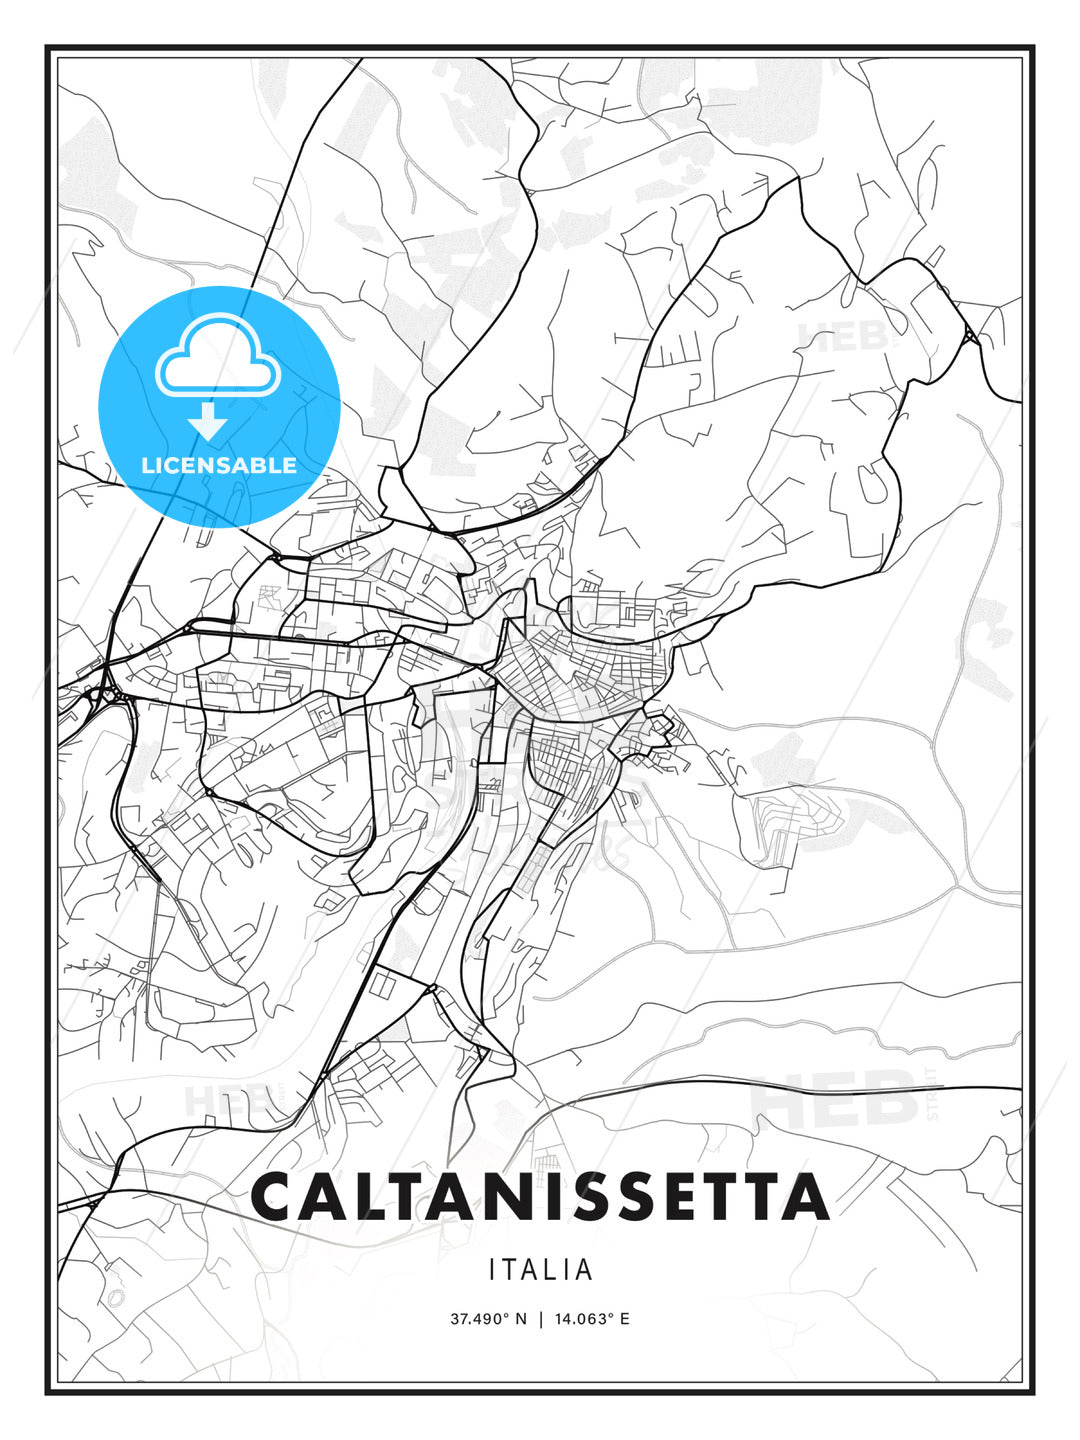 Caltanissetta, Italy, Modern Print Template in Various Formats - HEBSTREITS Sketches